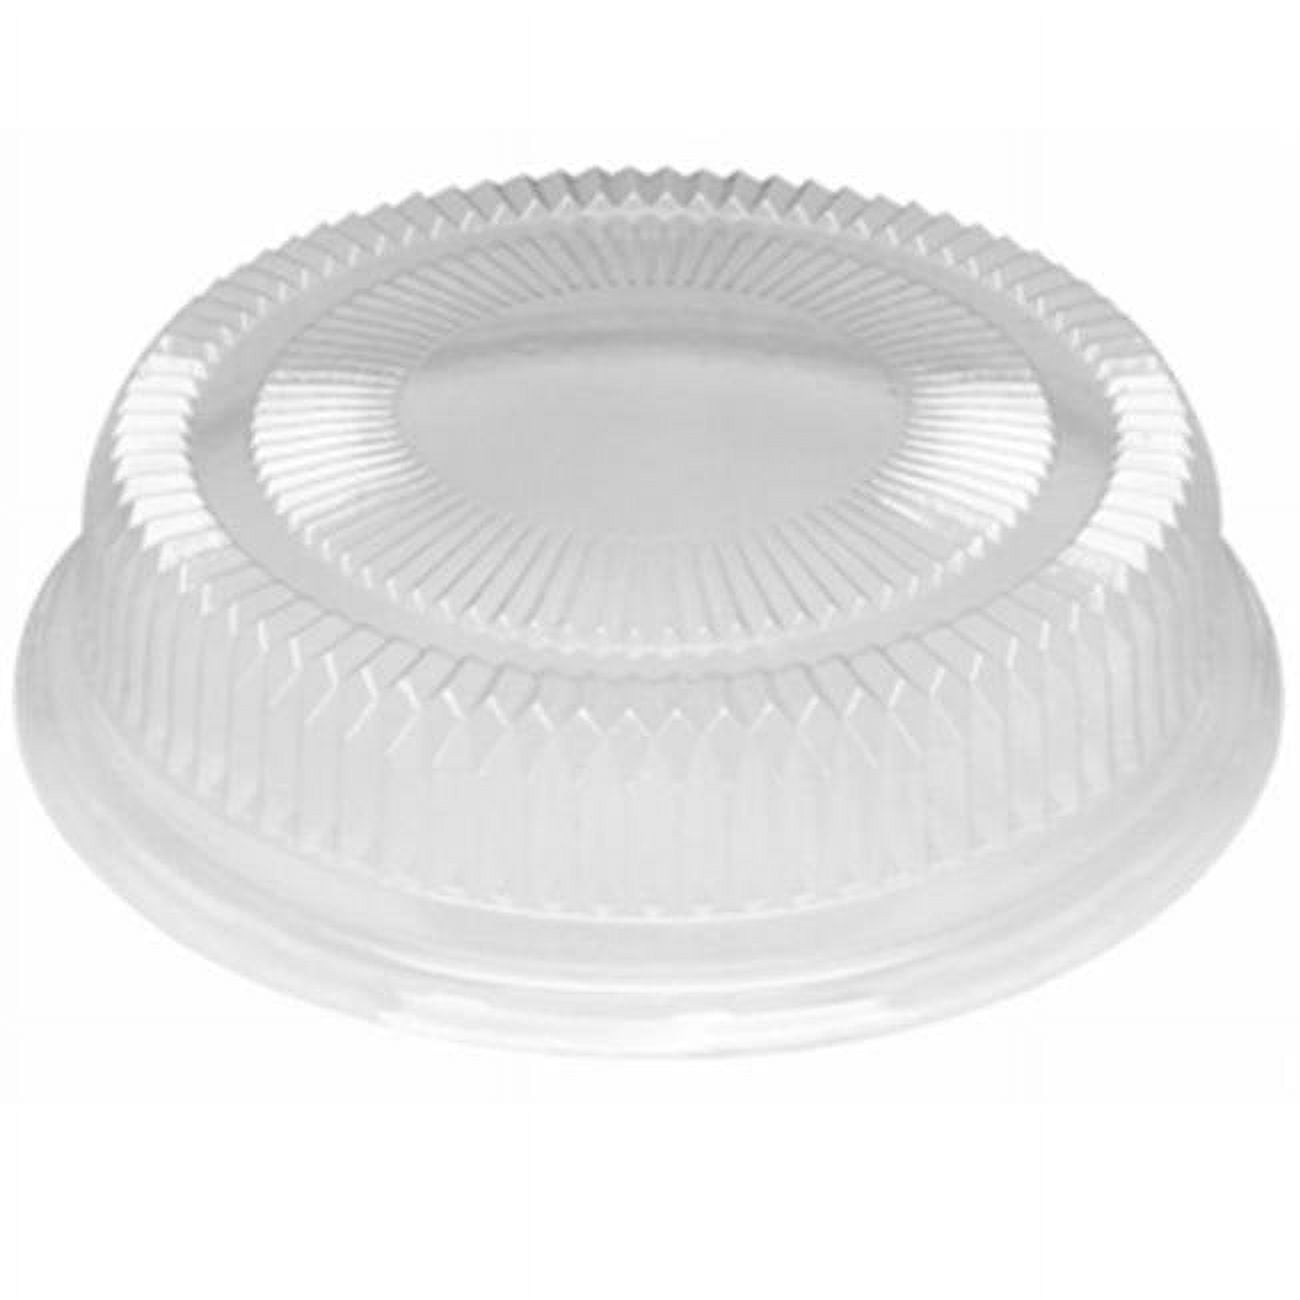 Lhp12stak Cpc 12 In. Clear Dome Lid For Cater Trays - Case Of 25